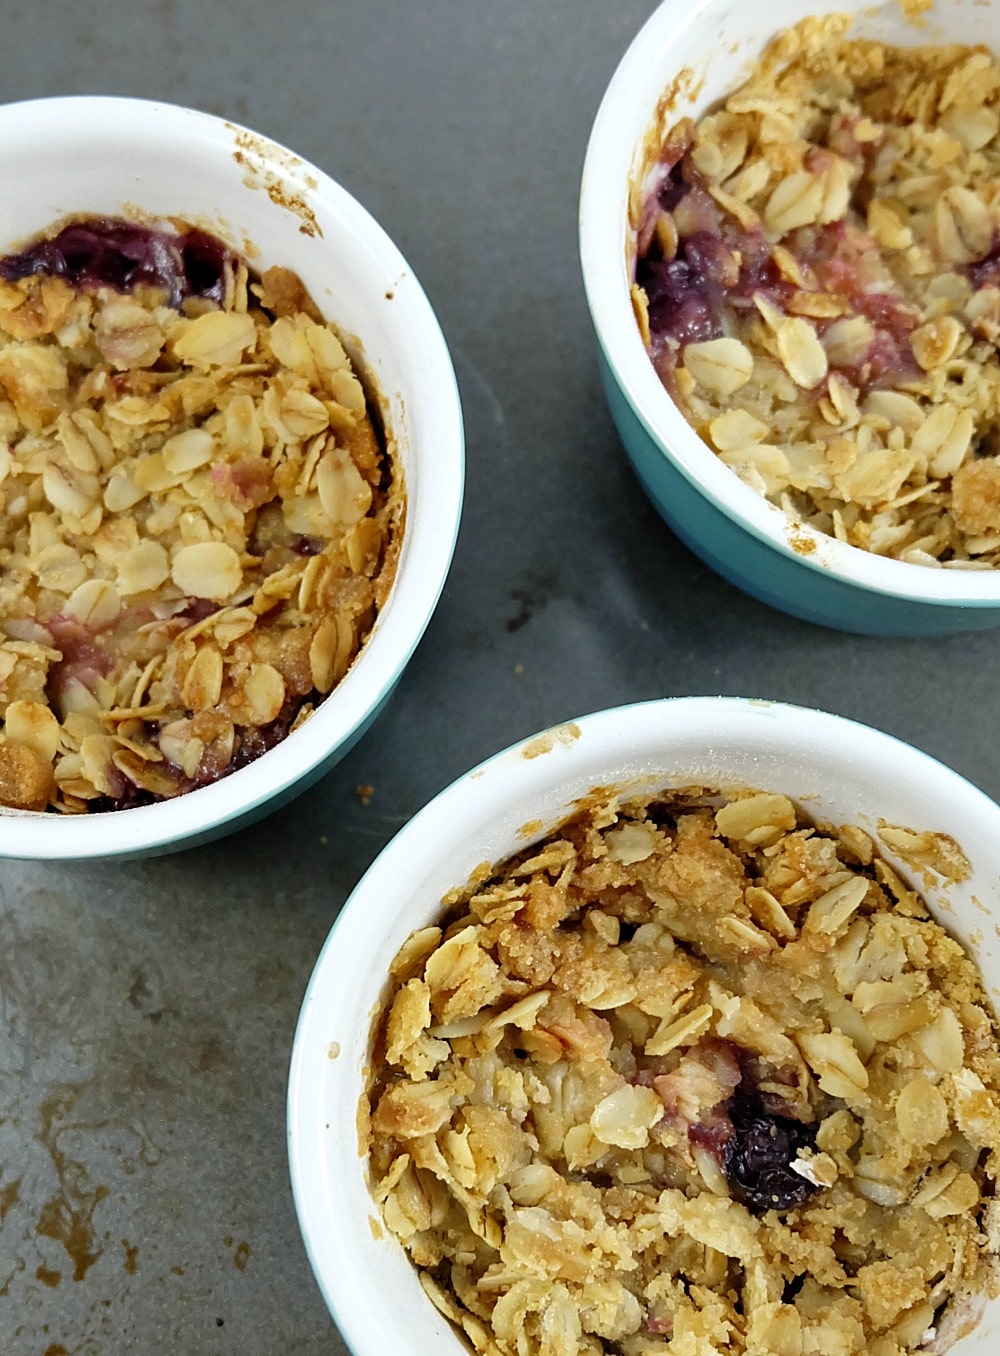 Pear and Blueberry Crisp